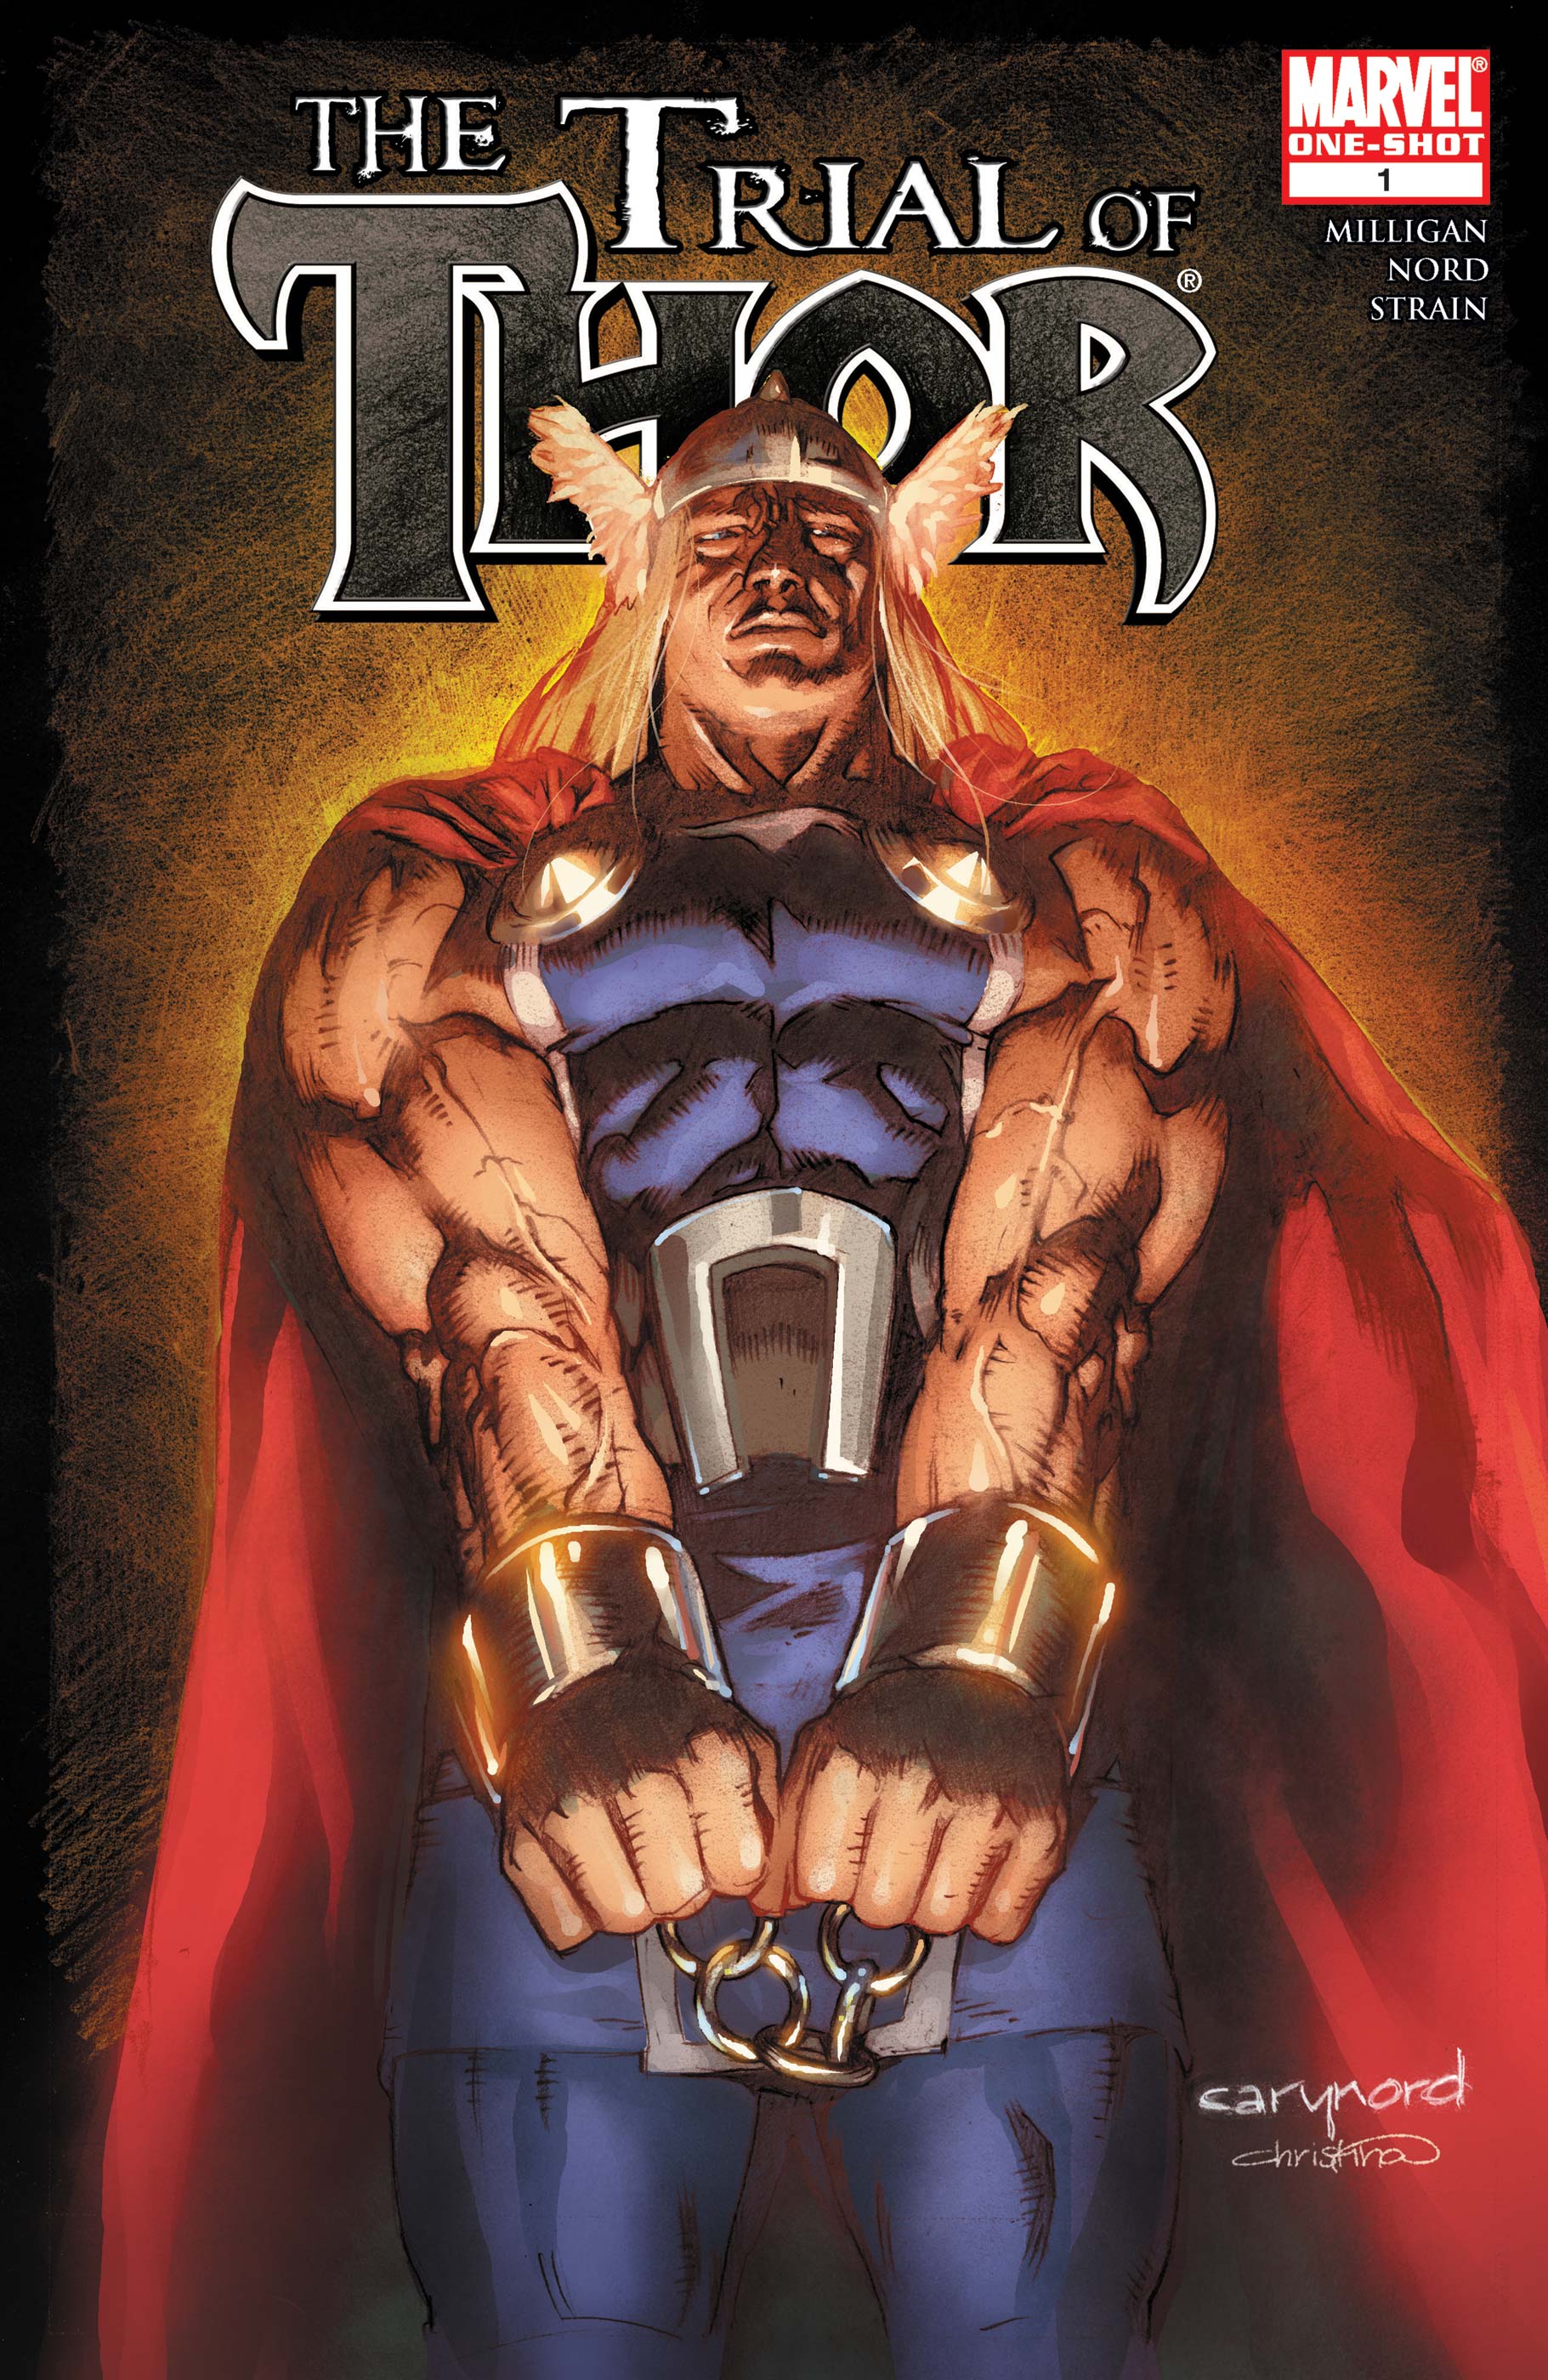 Thor: The Trial of Thor (2009) #1